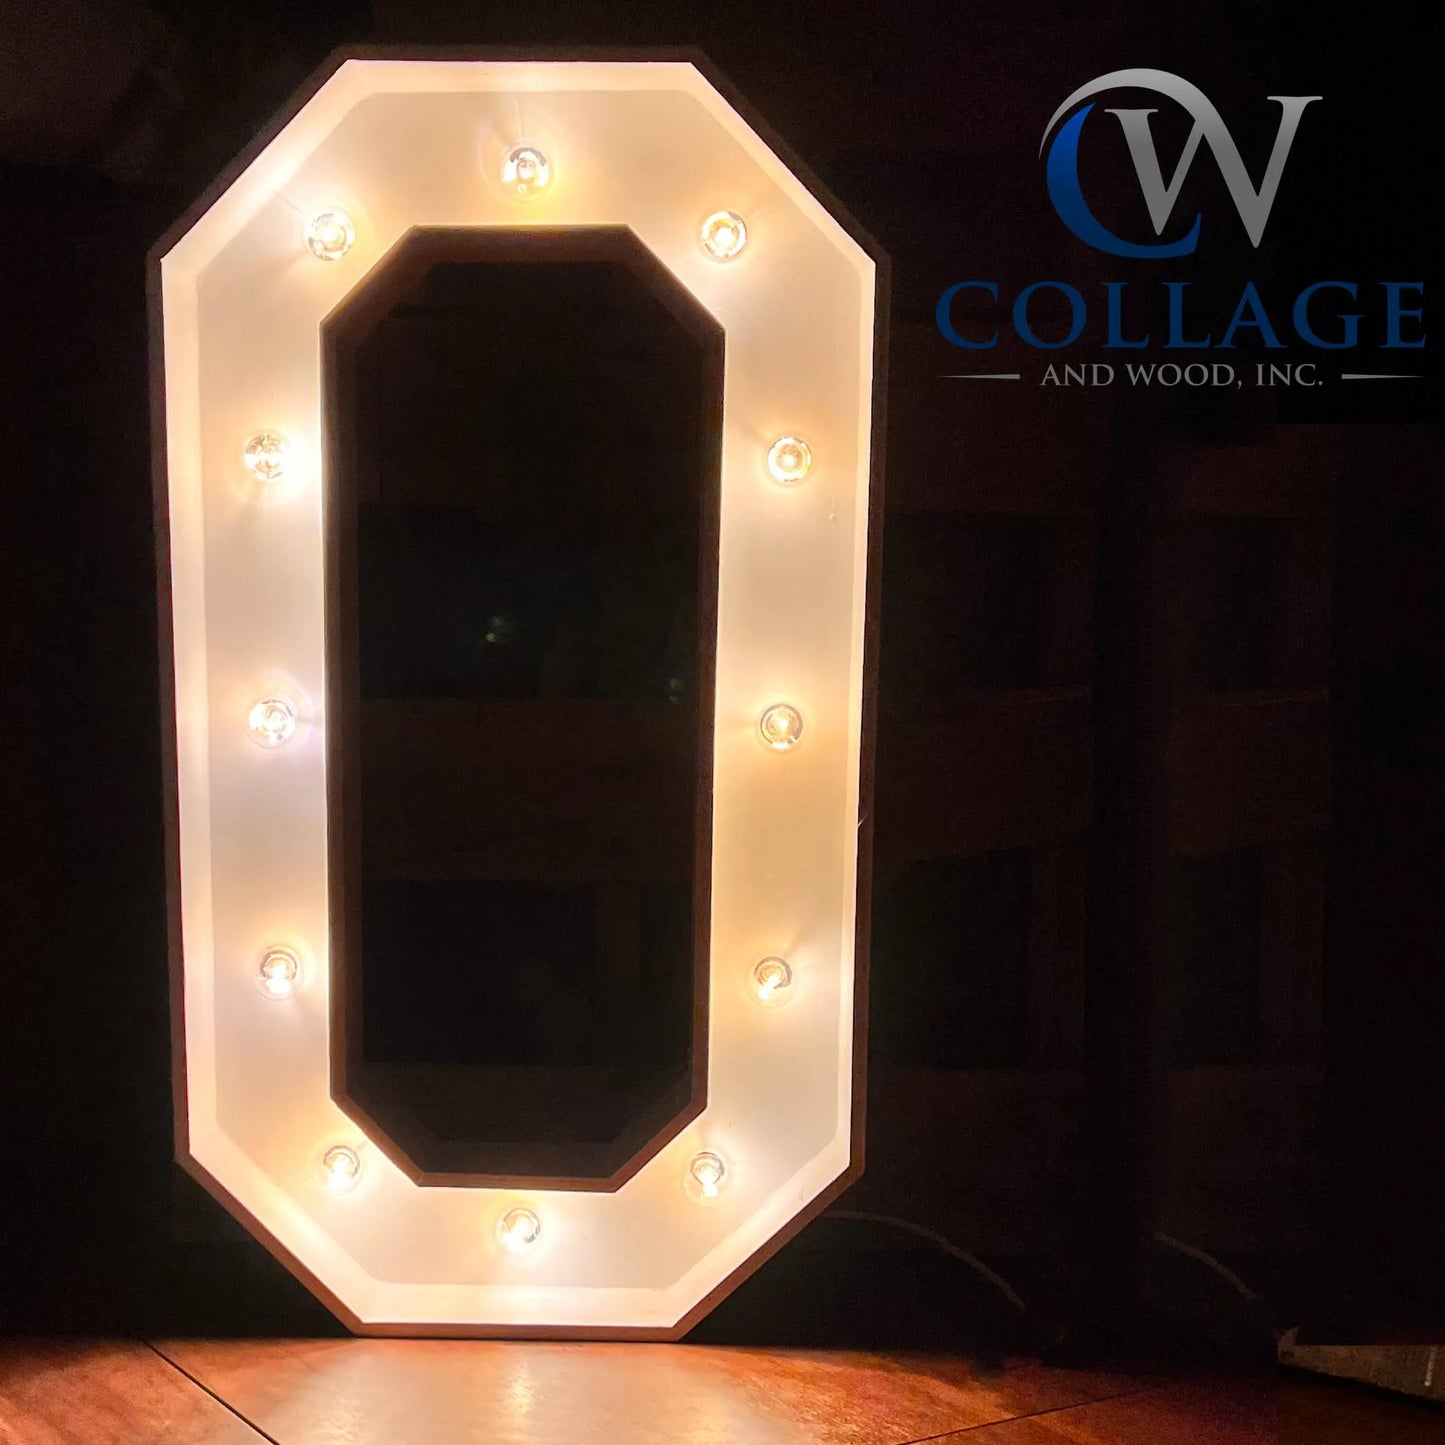 Outstanding 3-foot tall wooden marquee letter O, painted in a clean white hue, featuring sparkling battery-powered LED lights.